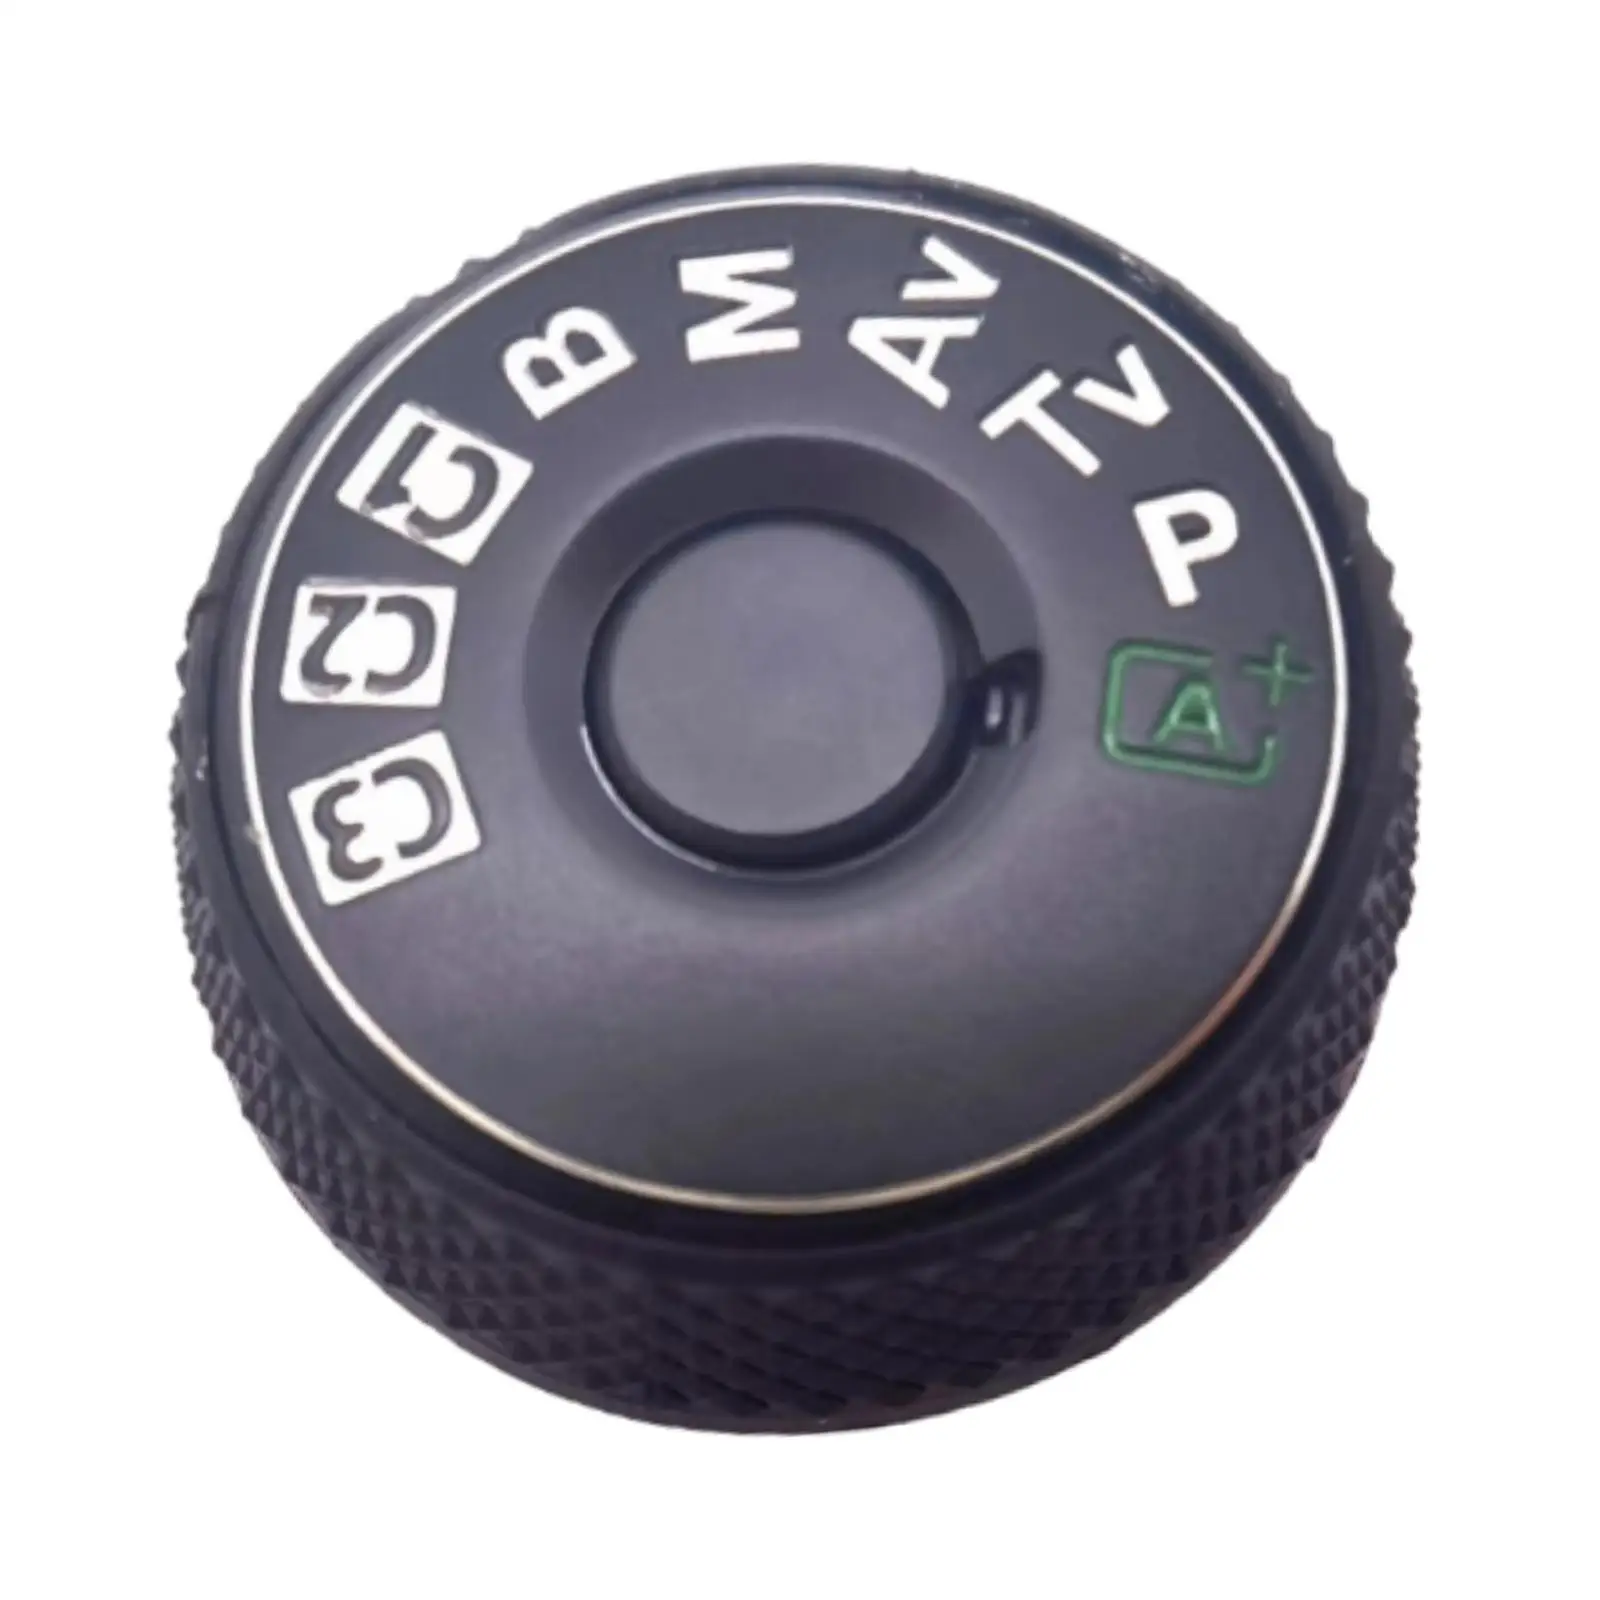 Camera Top Mode Dial Cover Button Digital Camera Repair Part for Canon 5D4 Easy Installation Sturdy Premium Quality